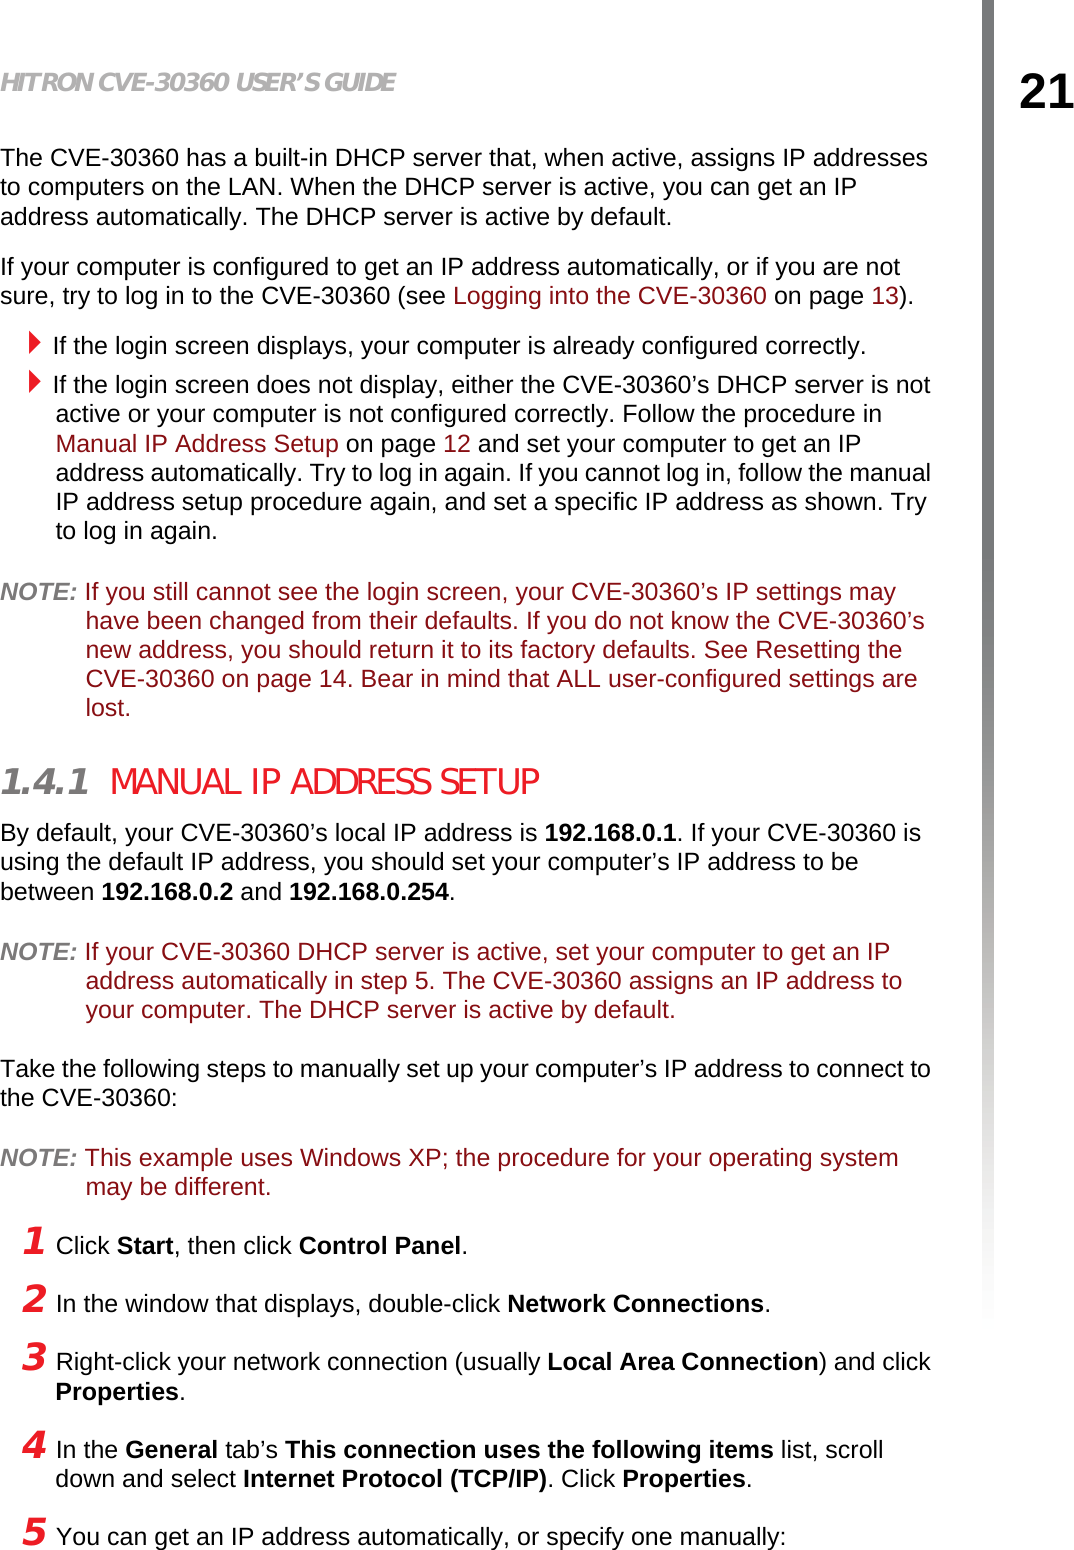 21HITRON CVE-30360 USER’S GUIDEINTRODUCTIONThe CVE-30360 has a built-in DHCP server that, when active, assigns IP addresses to computers on the LAN. When the DHCP server is active, you can get an IP address automatically. The DHCP server is active by default.If your computer is configured to get an IP address automatically, or if you are not sure, try to log in to the CVE-30360 (see Logging into the CVE-30360 on page 13). If the login screen displays, your computer is already configured correctly.If the login screen does not display, either the CVE-30360’s DHCP server is not active or your computer is not configured correctly. Follow the procedure in Manual IP Address Setup on page 12 and set your computer to get an IP address automatically. Try to log in again. If you cannot log in, follow the manual IP address setup procedure again, and set a specific IP address as shown. Try to log in again.NOTE: If you still cannot see the login screen, your CVE-30360’s IP settings may have been changed from their defaults. If you do not know the CVE-30360’s new address, you should return it to its factory defaults. See Resetting the CVE-30360 on page 14. Bear in mind that ALL user-configured settings are lost. 1.4.1  MANUAL IP ADDRESS SETUPBy default, your CVE-30360’s local IP address is 192.168.0.1. If your CVE-30360 is using the default IP address, you should set your computer’s IP address to be between 192.168.0.2 and 192.168.0.254.NOTE: If your CVE-30360 DHCP server is active, set your computer to get an IP address automatically in step 5. The CVE-30360 assigns an IP address to your computer. The DHCP server is active by default.Take the following steps to manually set up your computer’s IP address to connect to the CVE-30360:NOTE: This example uses Windows XP; the procedure for your operating system may be different.1 Click Start, then click Control Panel.2 In the window that displays, double-click Network Connections.3 Right-click your network connection (usually Local Area Connection) and click Properties.4 In the General tab’s This connection uses the following items list, scroll down and select Internet Protocol (TCP/IP). Click Properties.5 You can get an IP address automatically, or specify one manually: